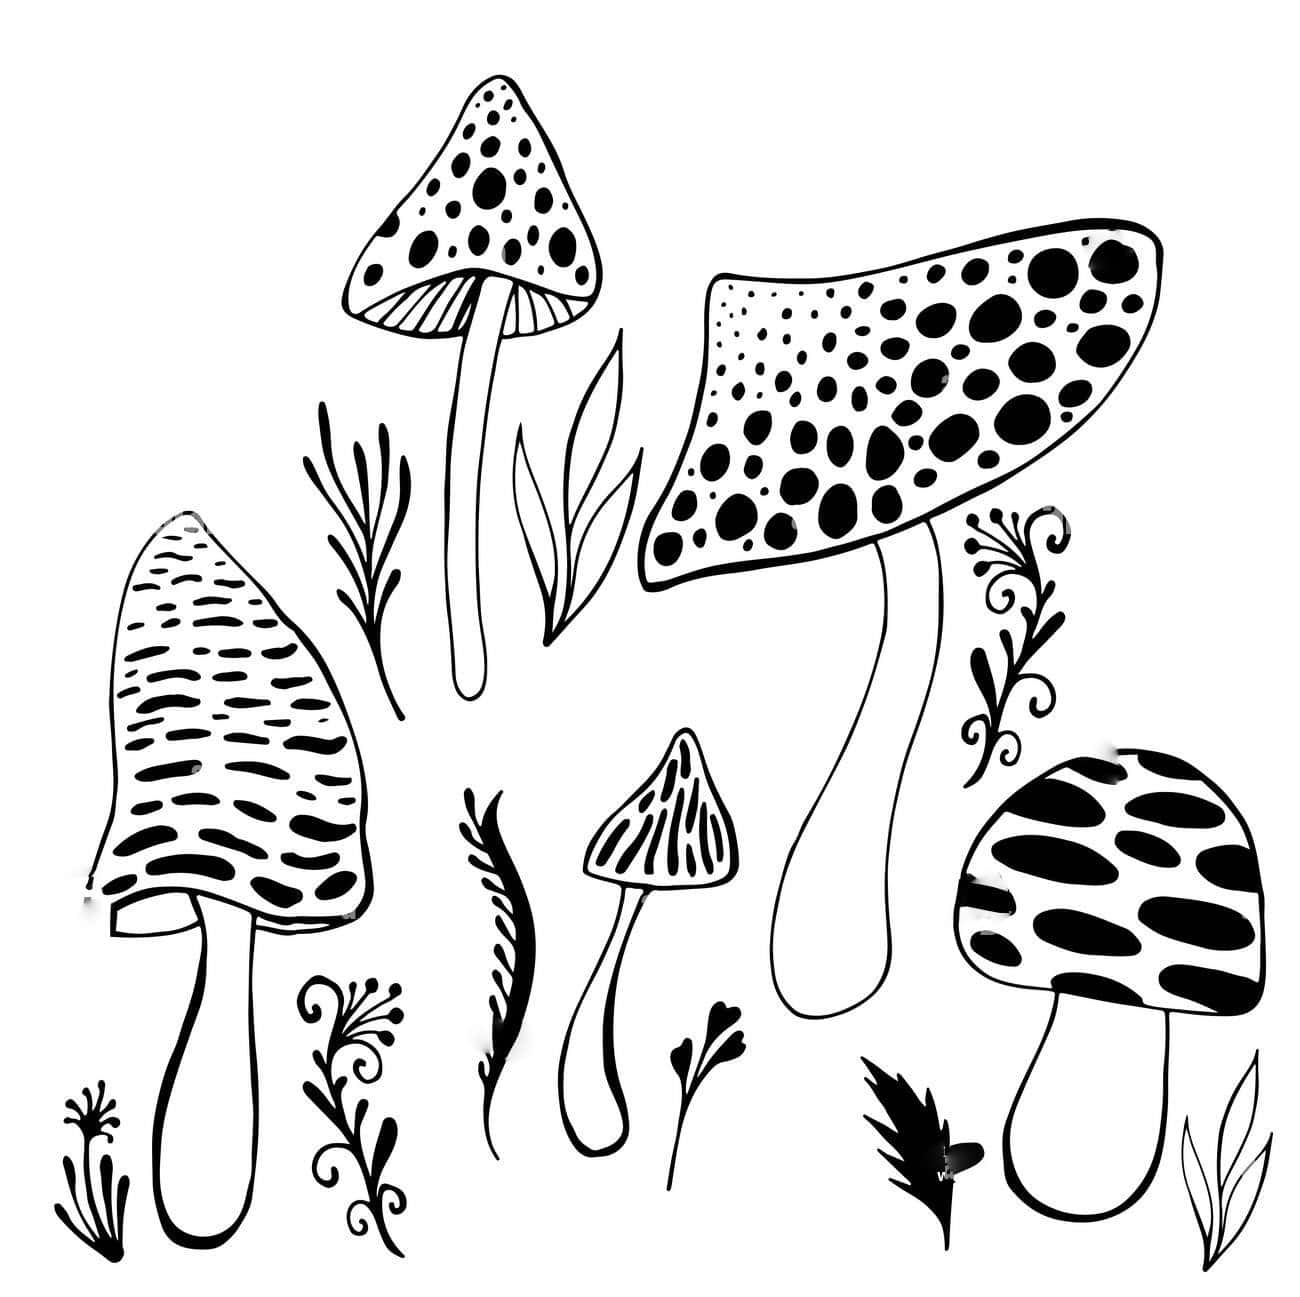 A surreal and beautiful illustration of trippy mushrooms